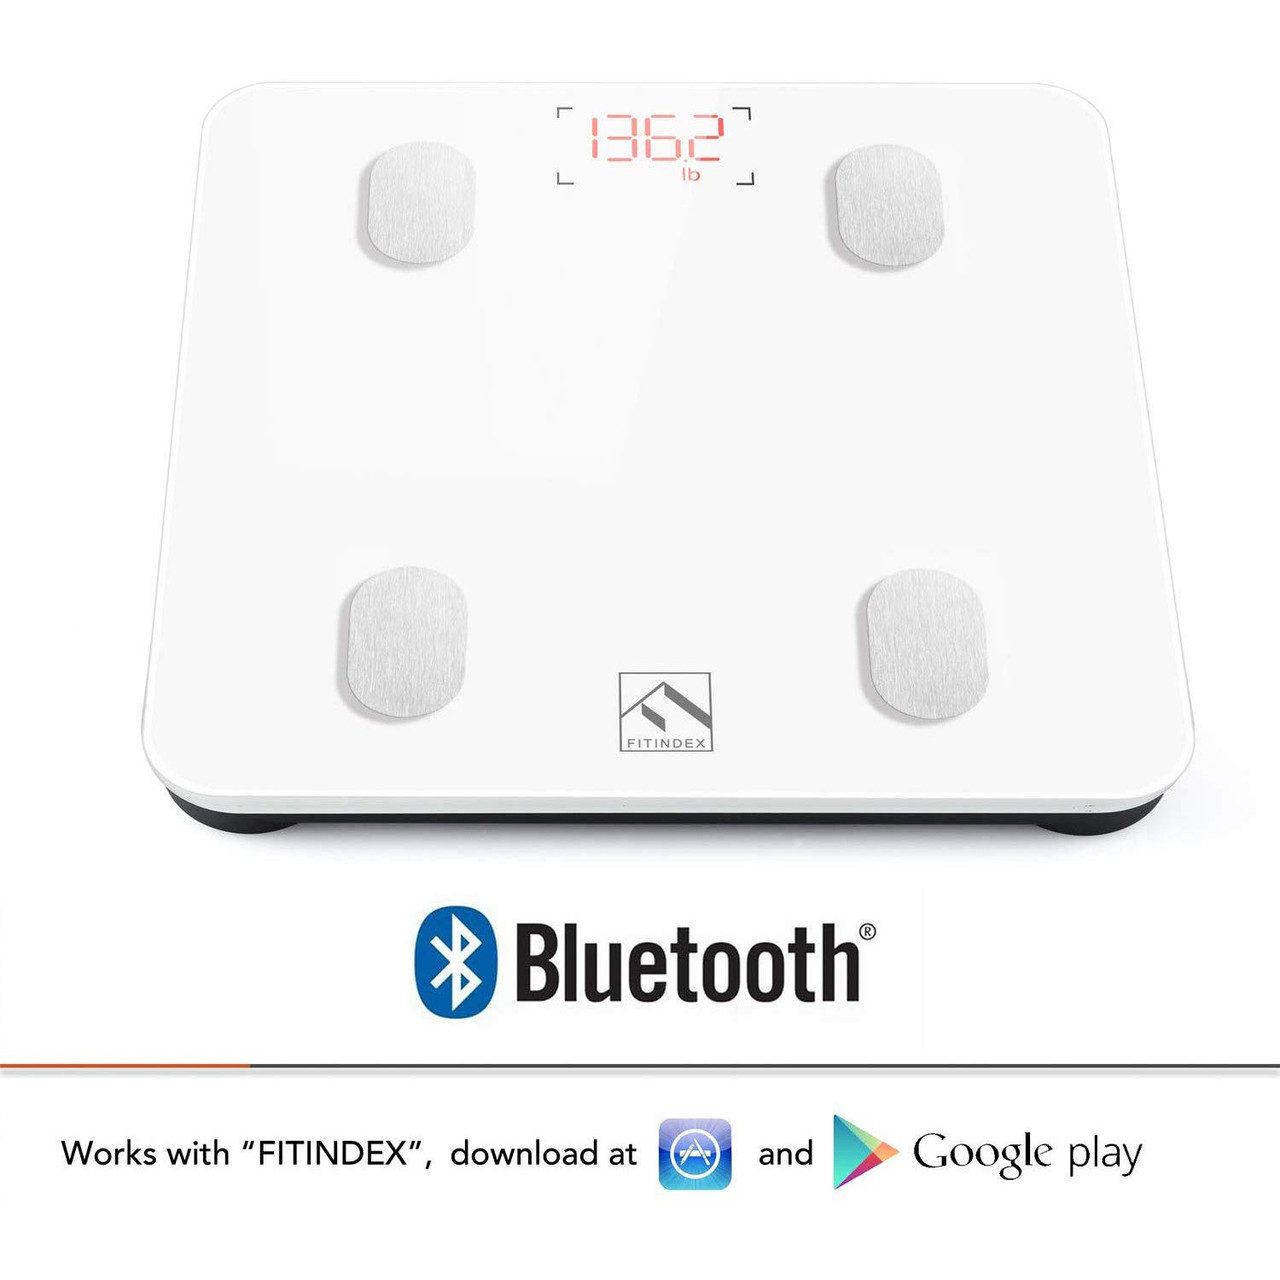 FitIndex Scale - Smart Bluetooth Body Fat Scale for Bathroom